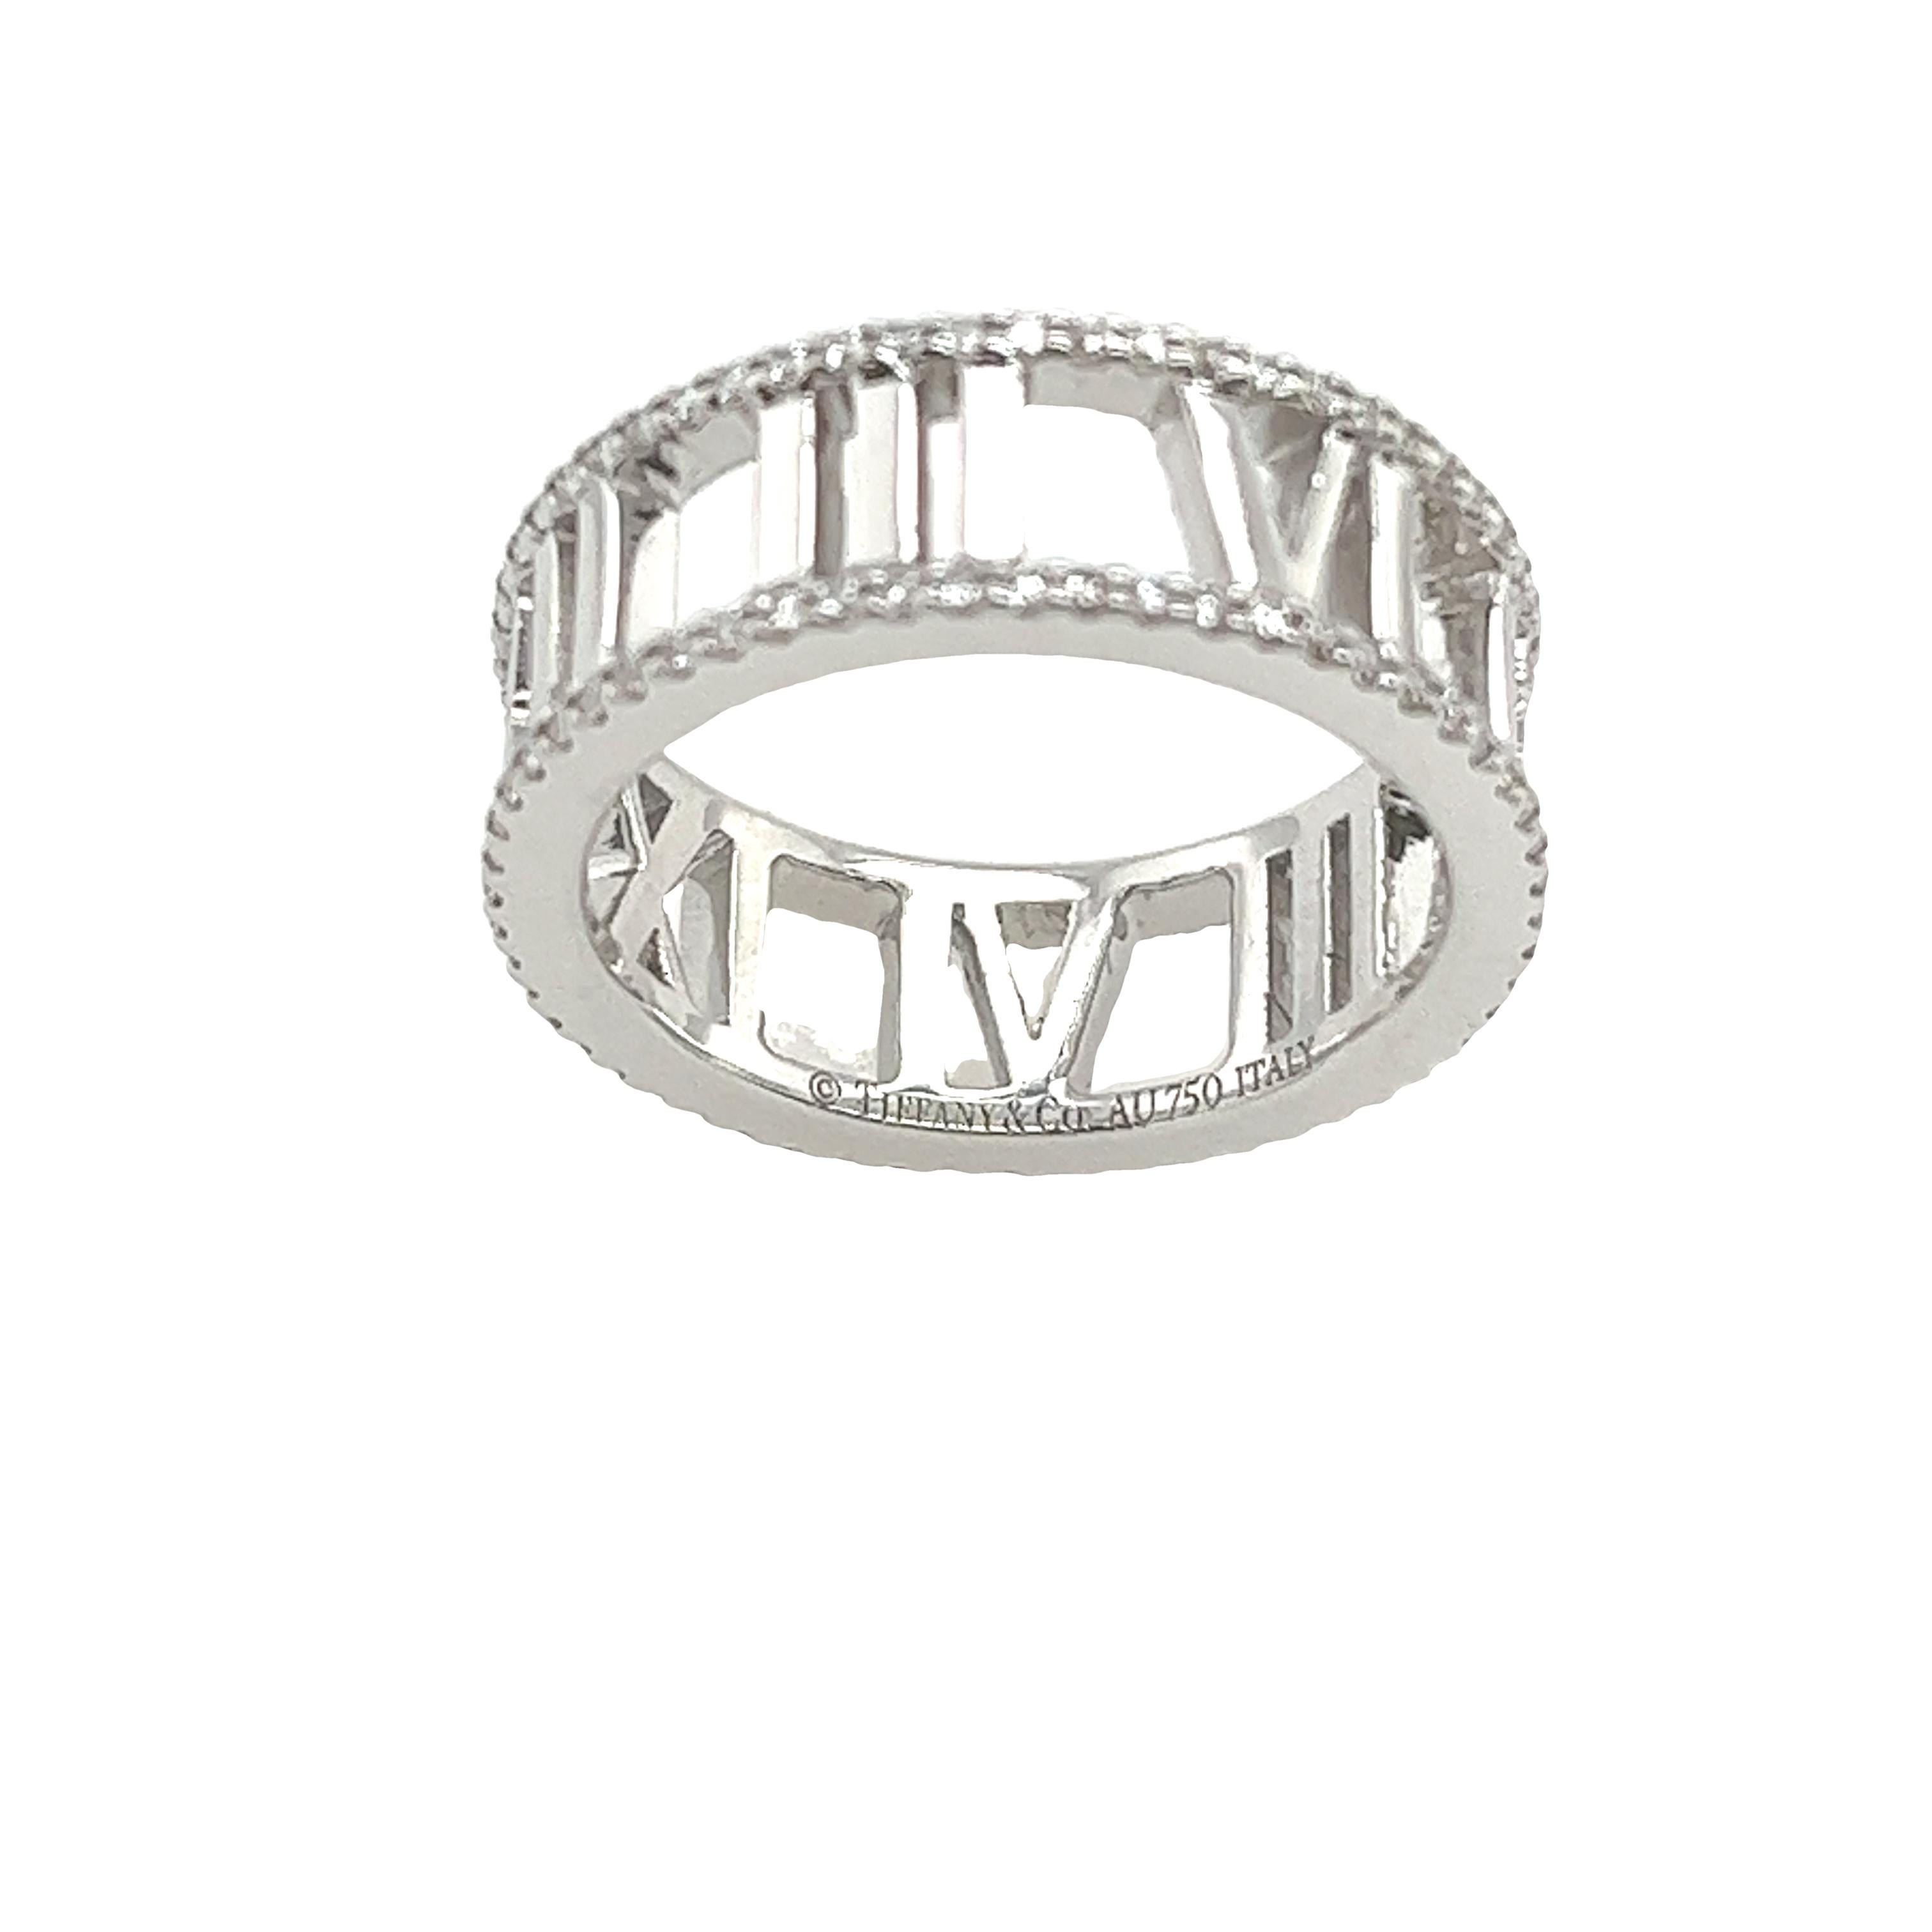 Elevate your style with the timeless elegance of the Tiffany & Co. Diamond Atlas Ring. Crafted in 18ct white gold, this iconic piece features the signature Roman numeral motif accented with dazzling diamonds. With its sleek design and sophisticated